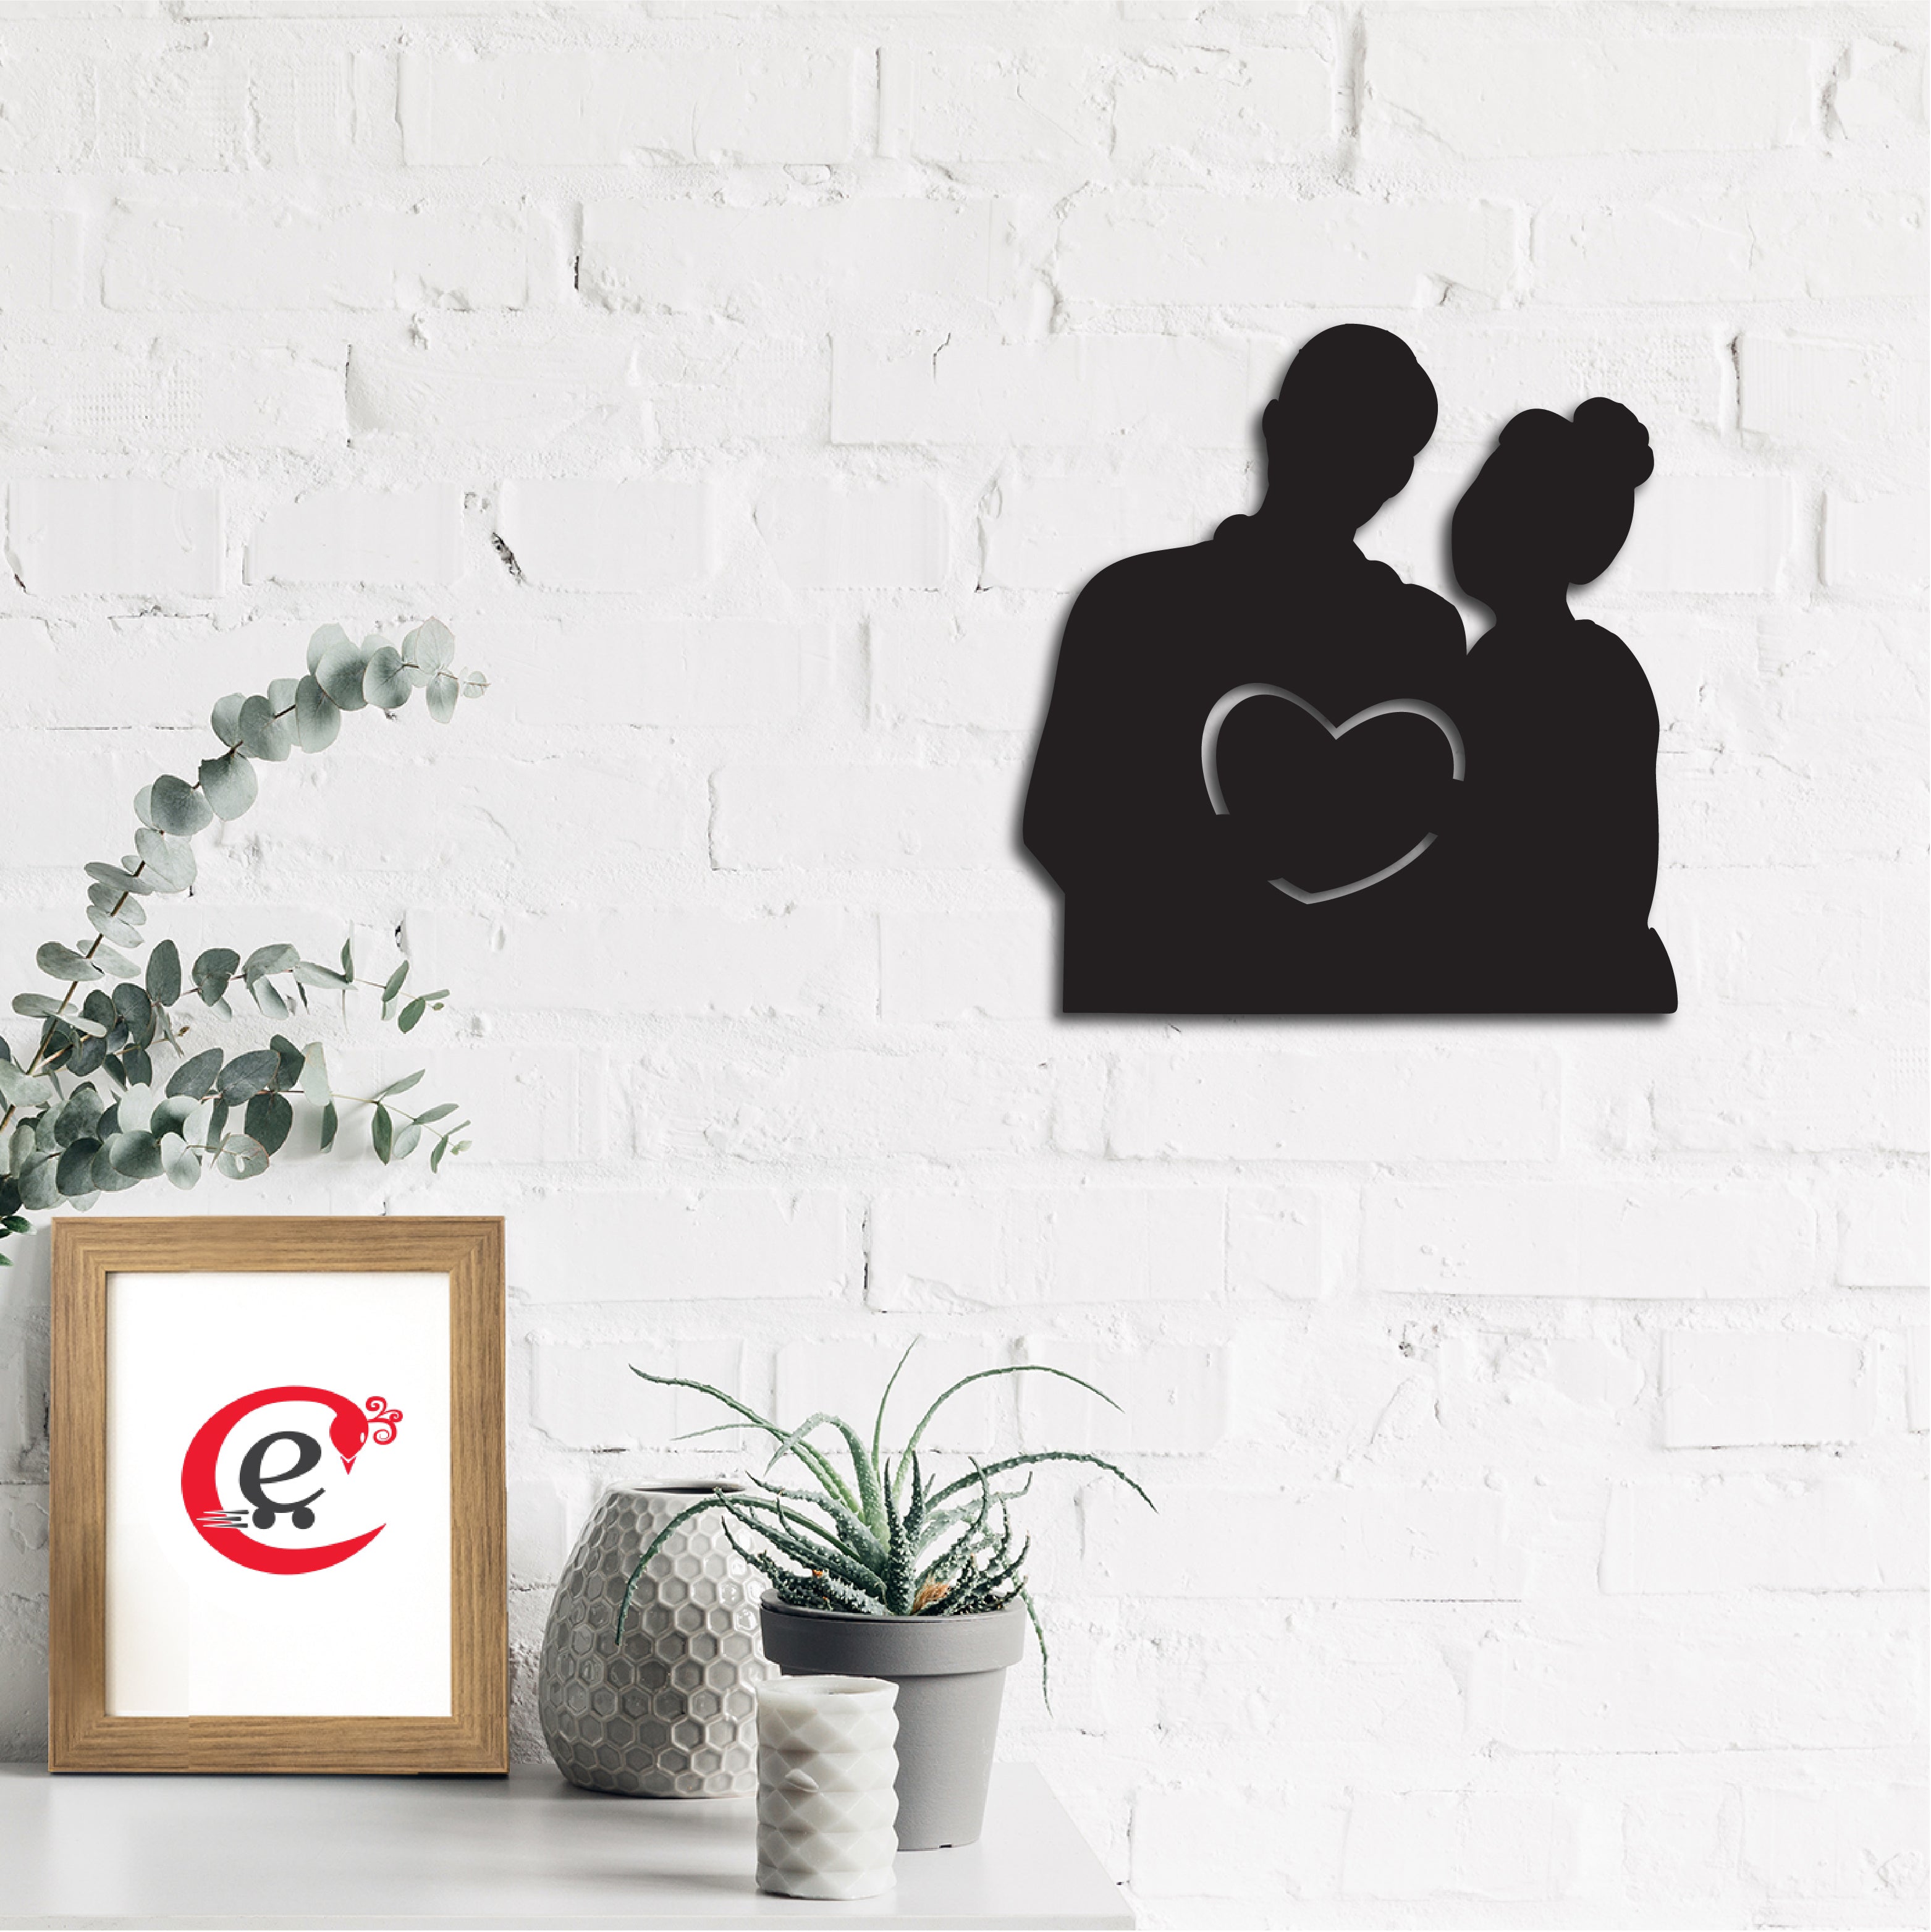 Couple Holding Heart Black Engineered Wood Wall Art Cutout, Ready To Hang Home Decor